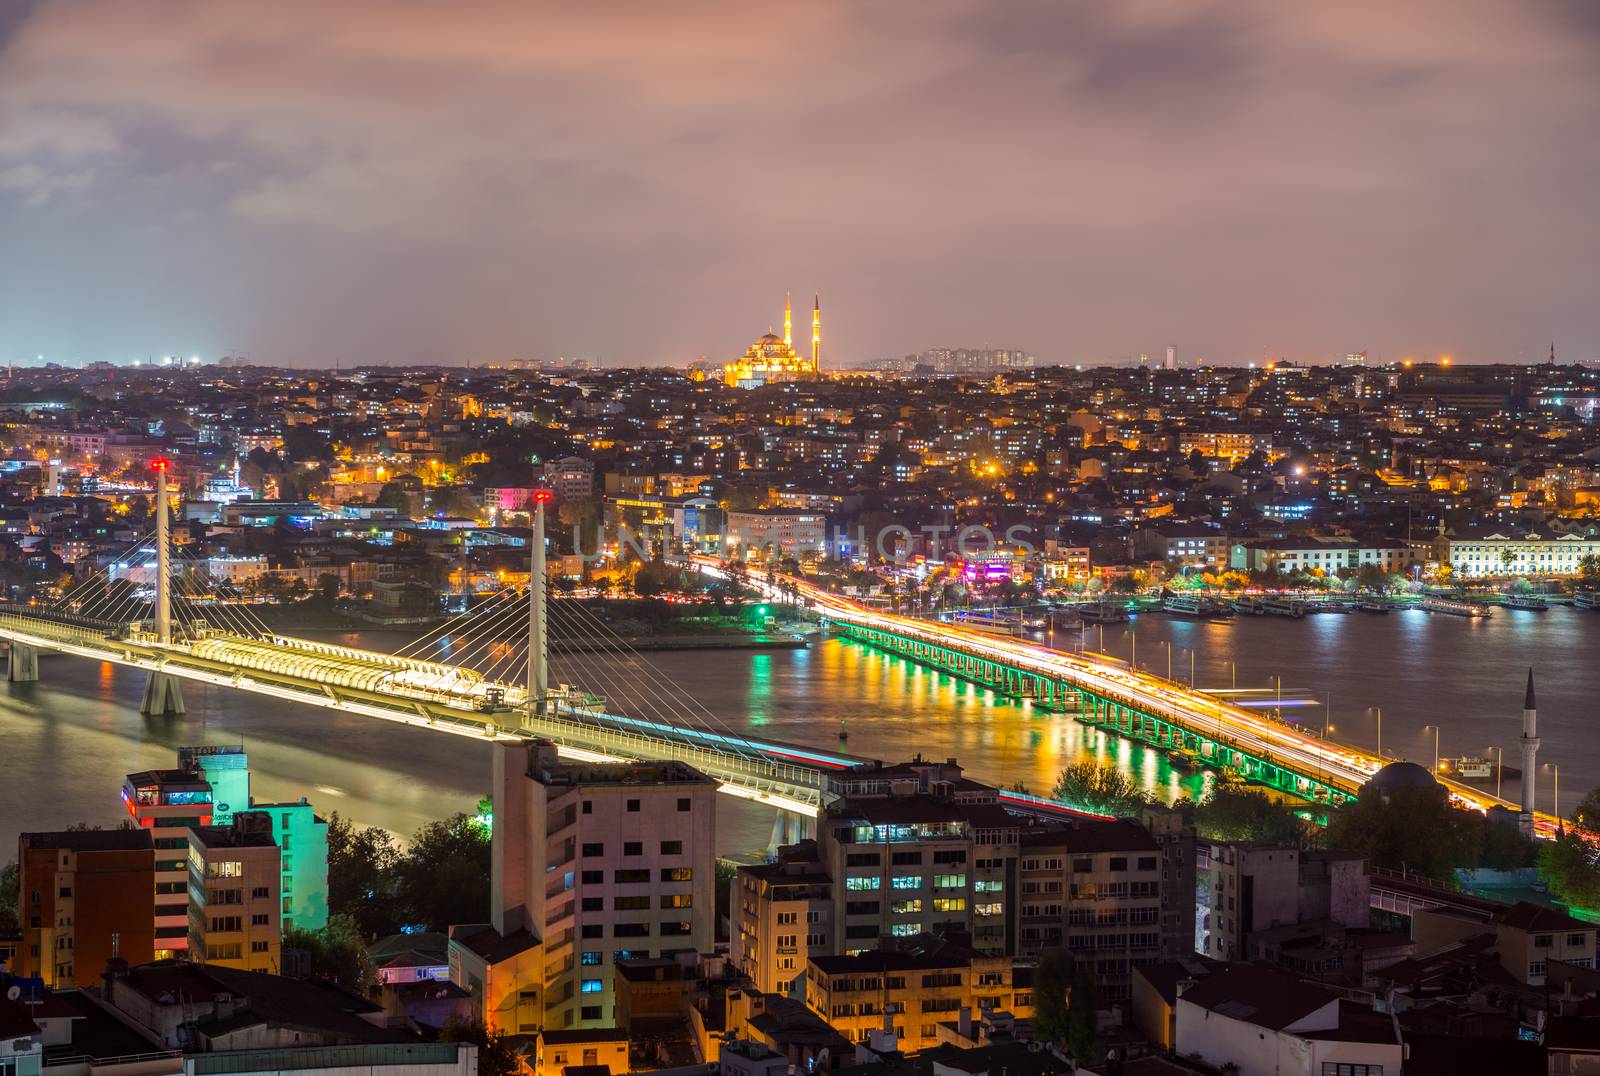 ISTANBUL - SEPTEMBER 17, 2014: City night panorama with New Galata Bridge and Ataturk Bridge on background. Istanbul is visited by more than 11 million people every year.